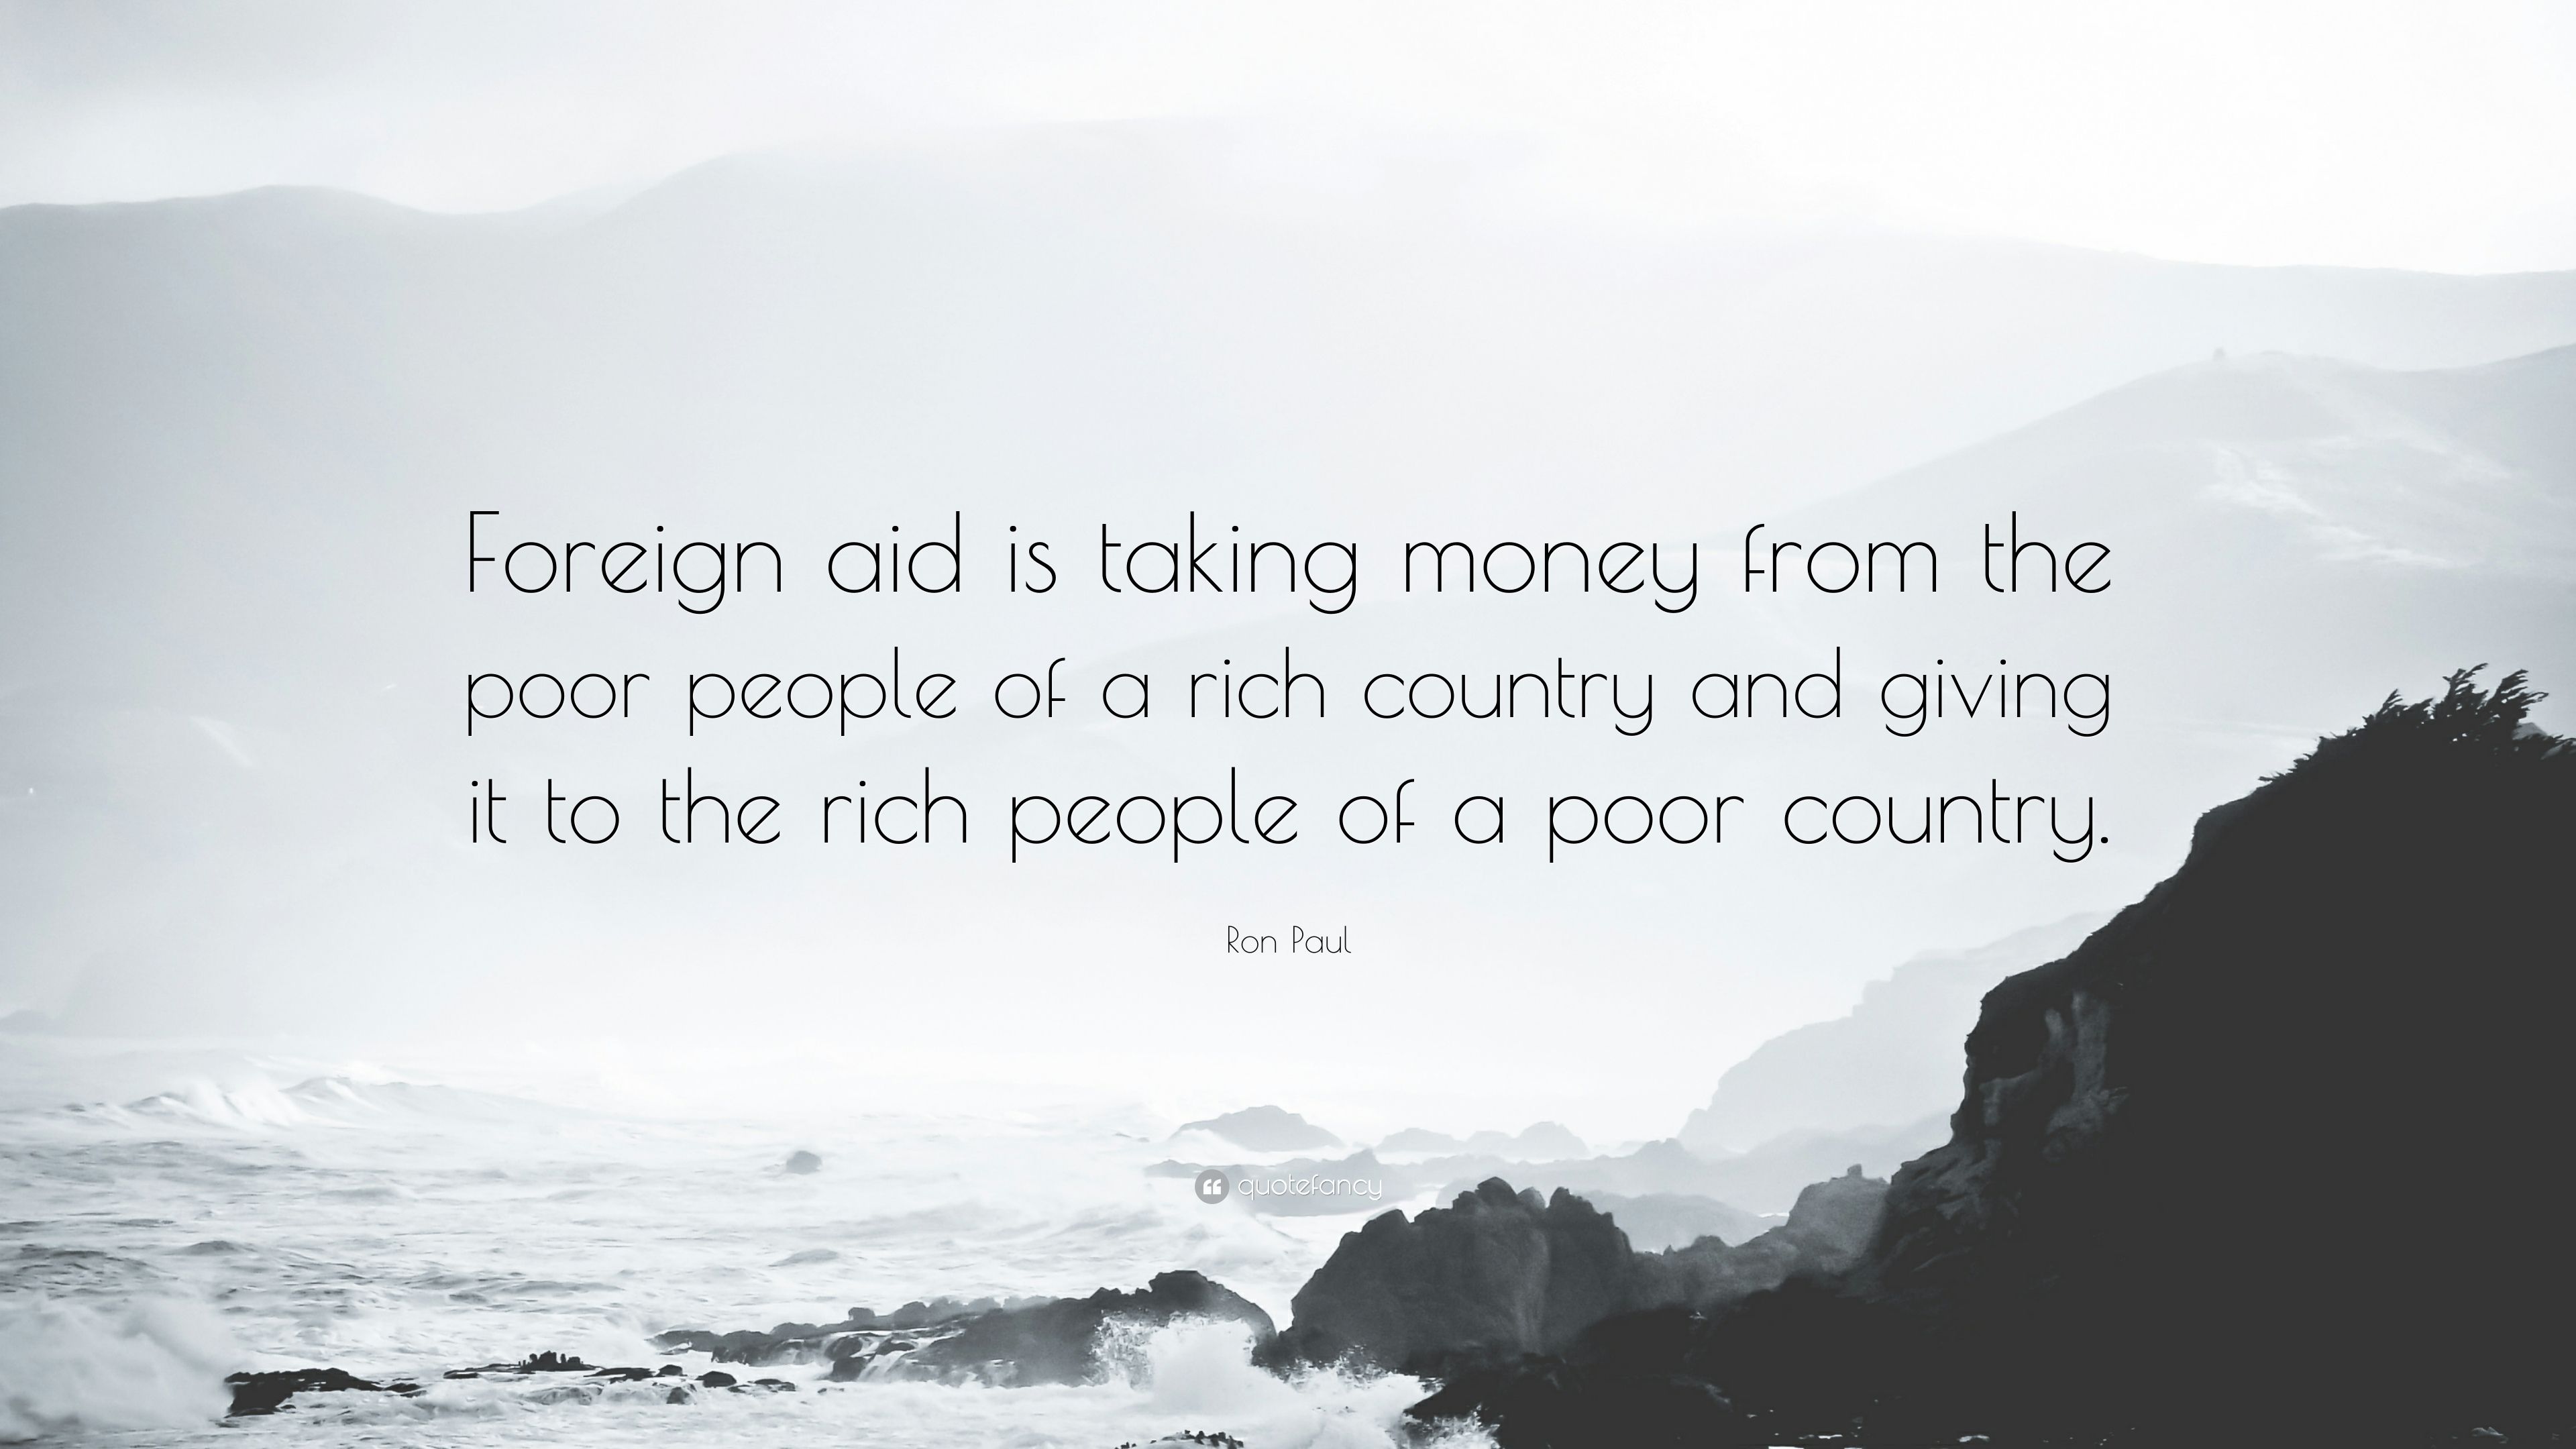 Ron Paul Quote: “Foreign aid is taking money from the poor people